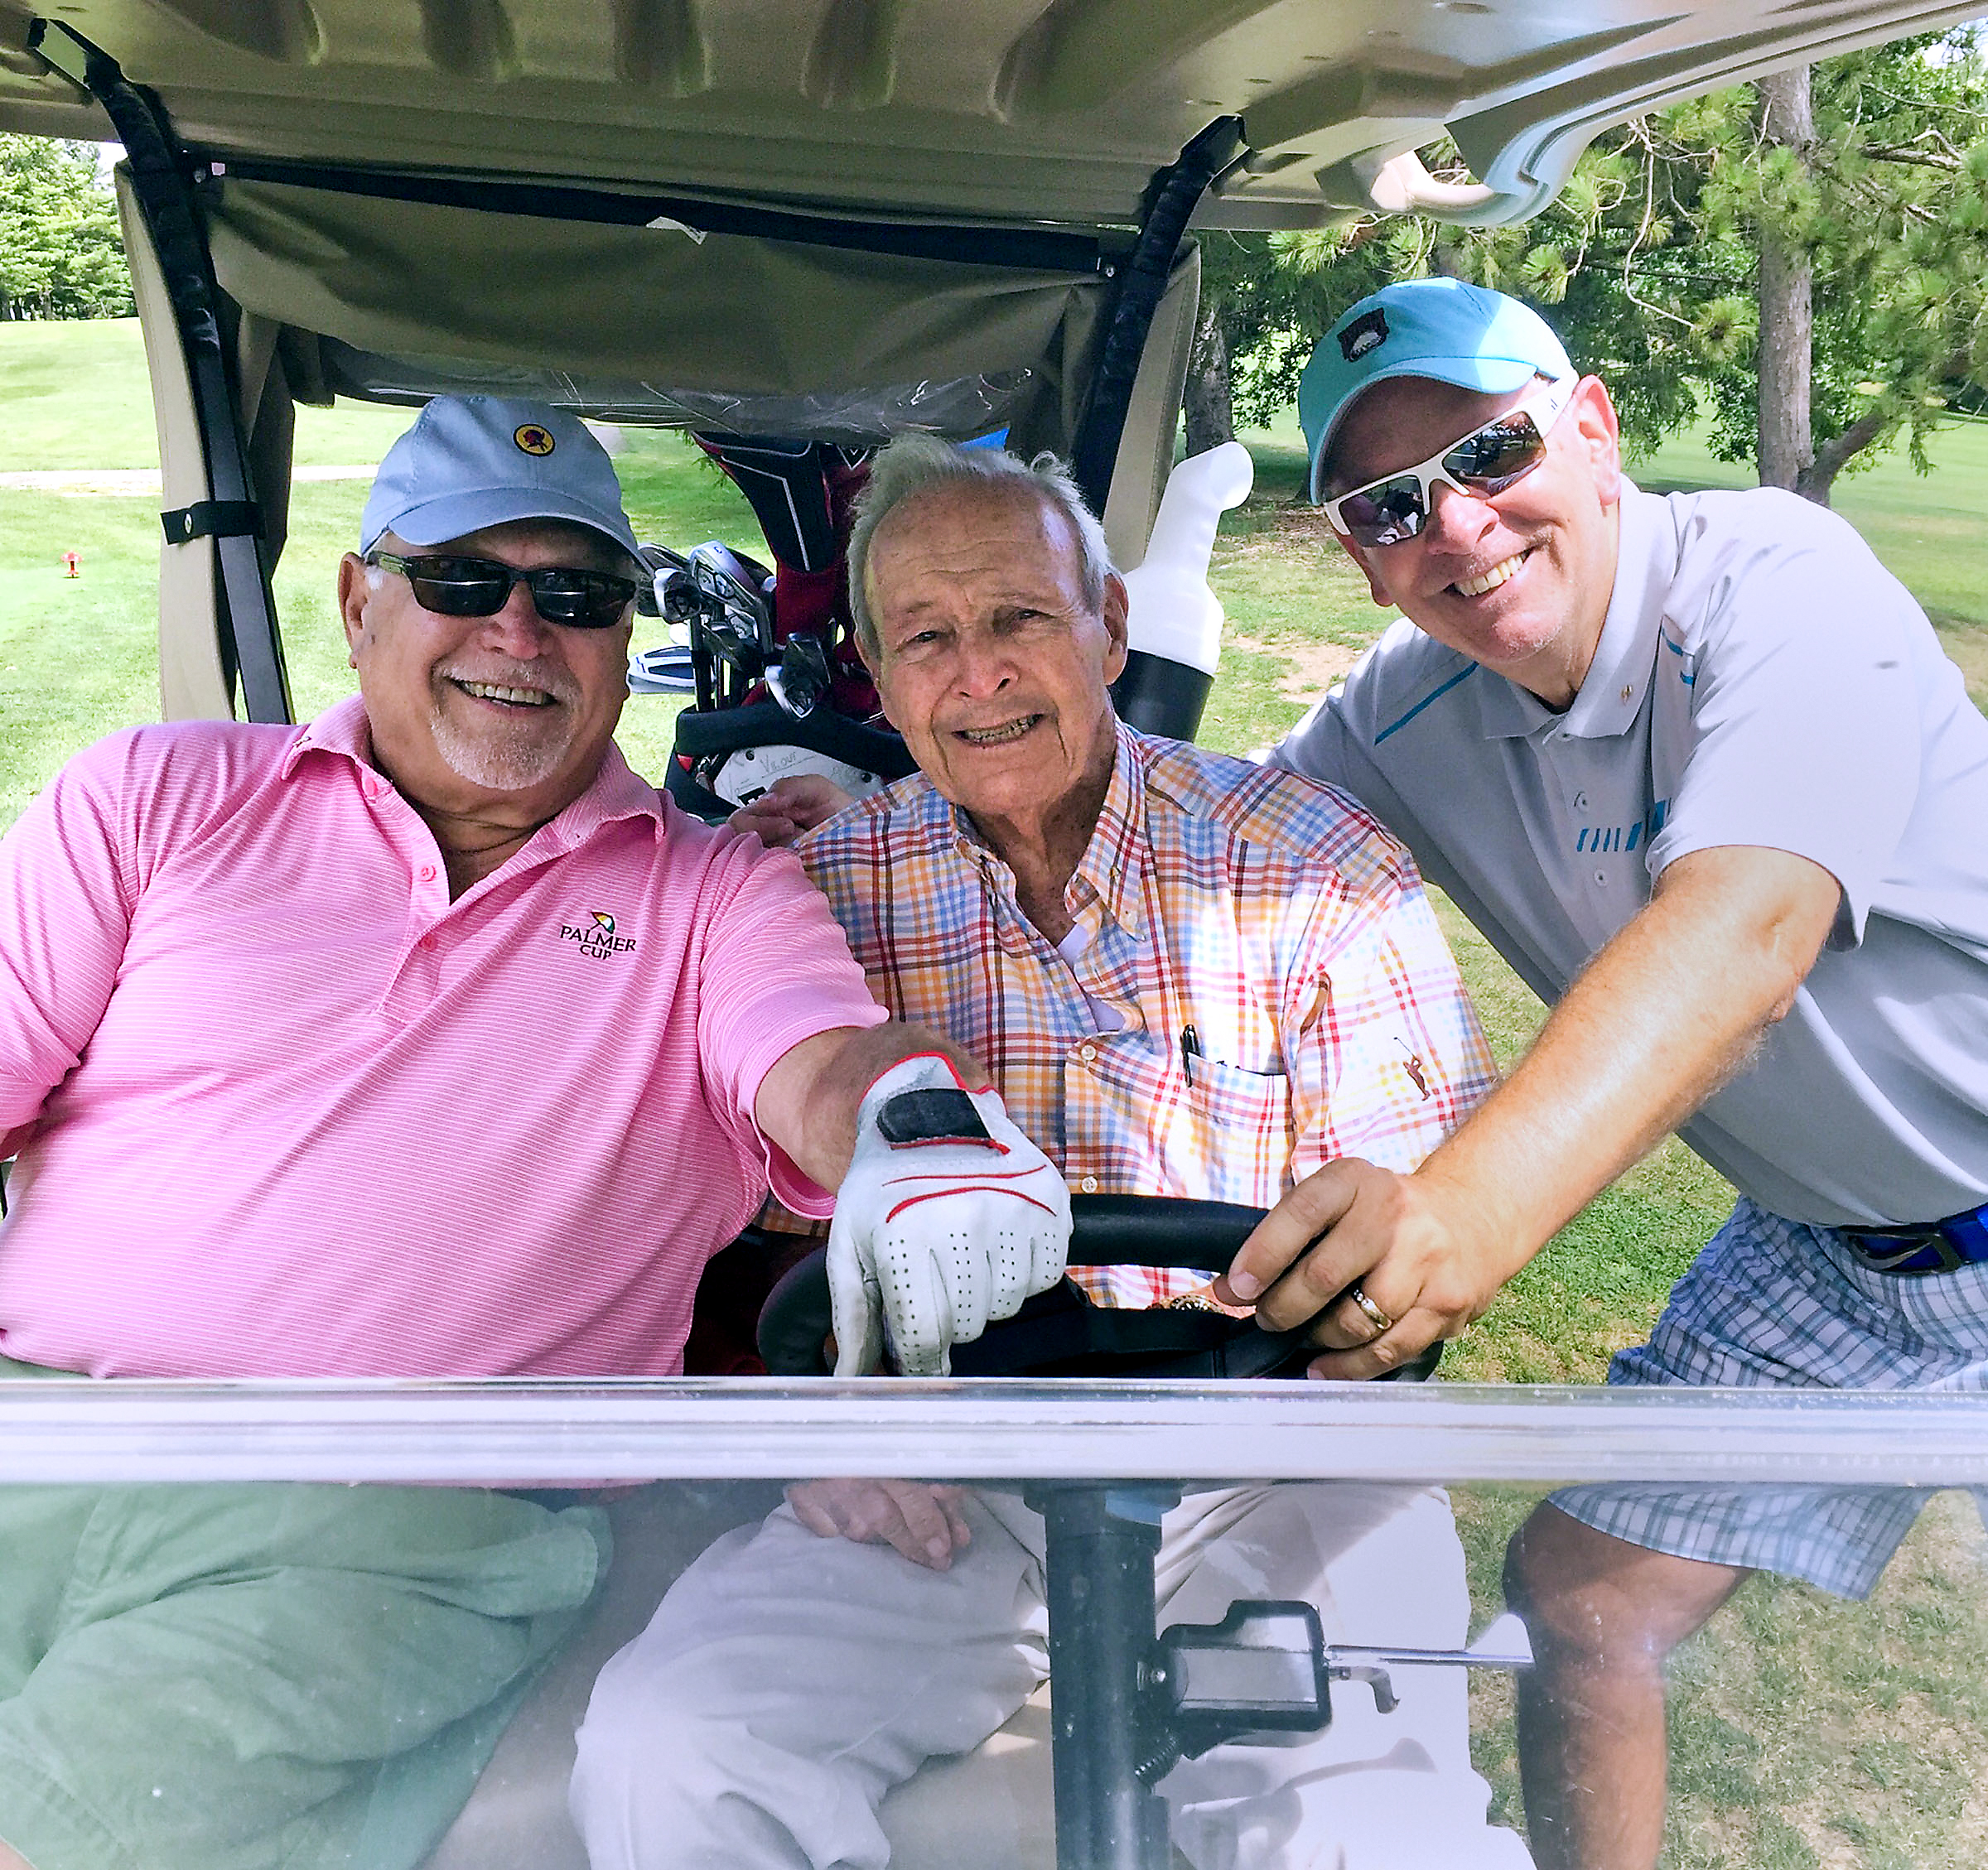 Arnold Palmer, center, Post-Gazette golf writer Gerry Dulac, right, and The Fan golf host Mike Dudurich at Latrobe Country Club in August.